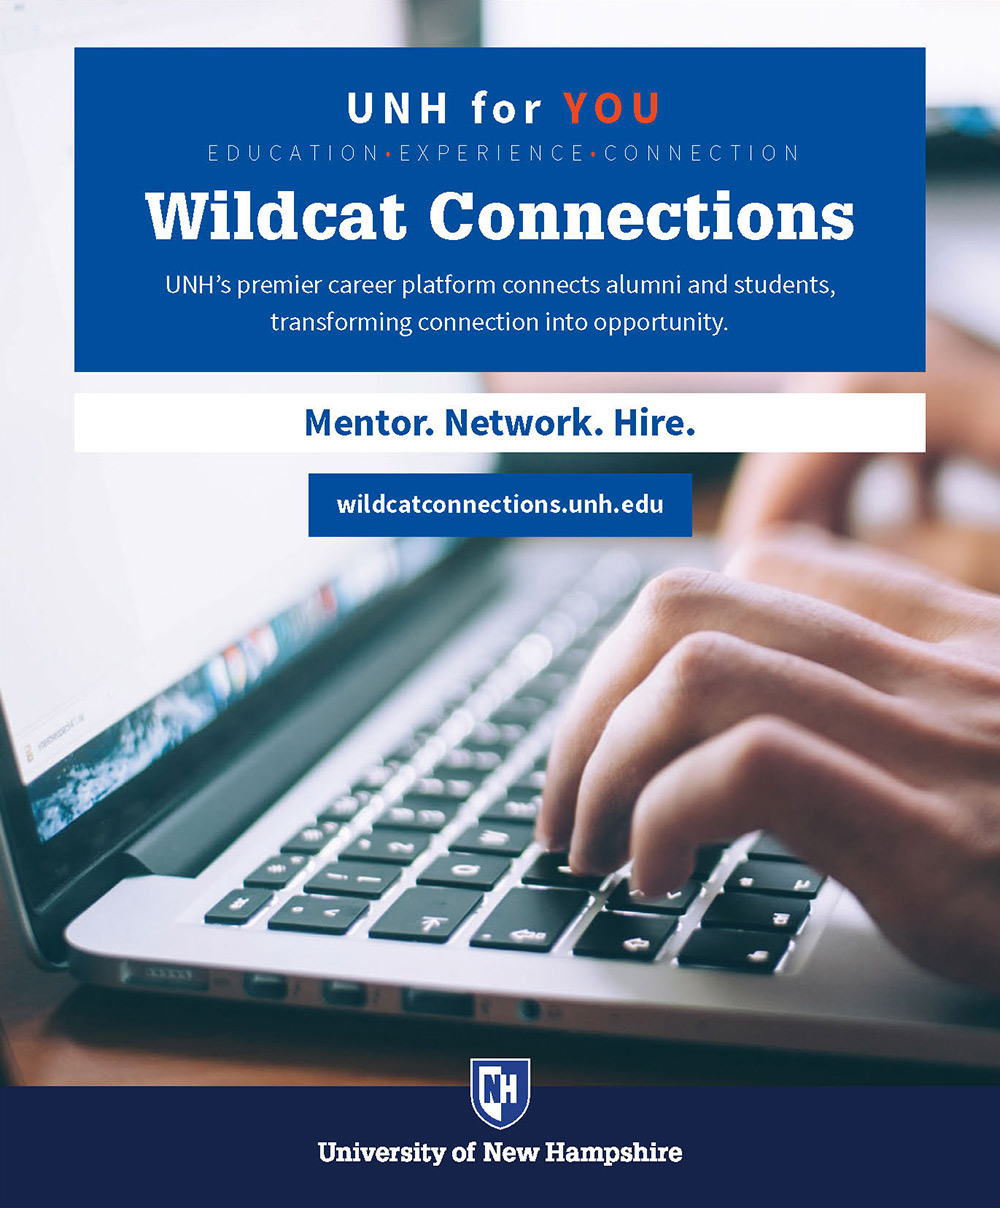 UNH for YOU: Wildcat Connections Advertisement